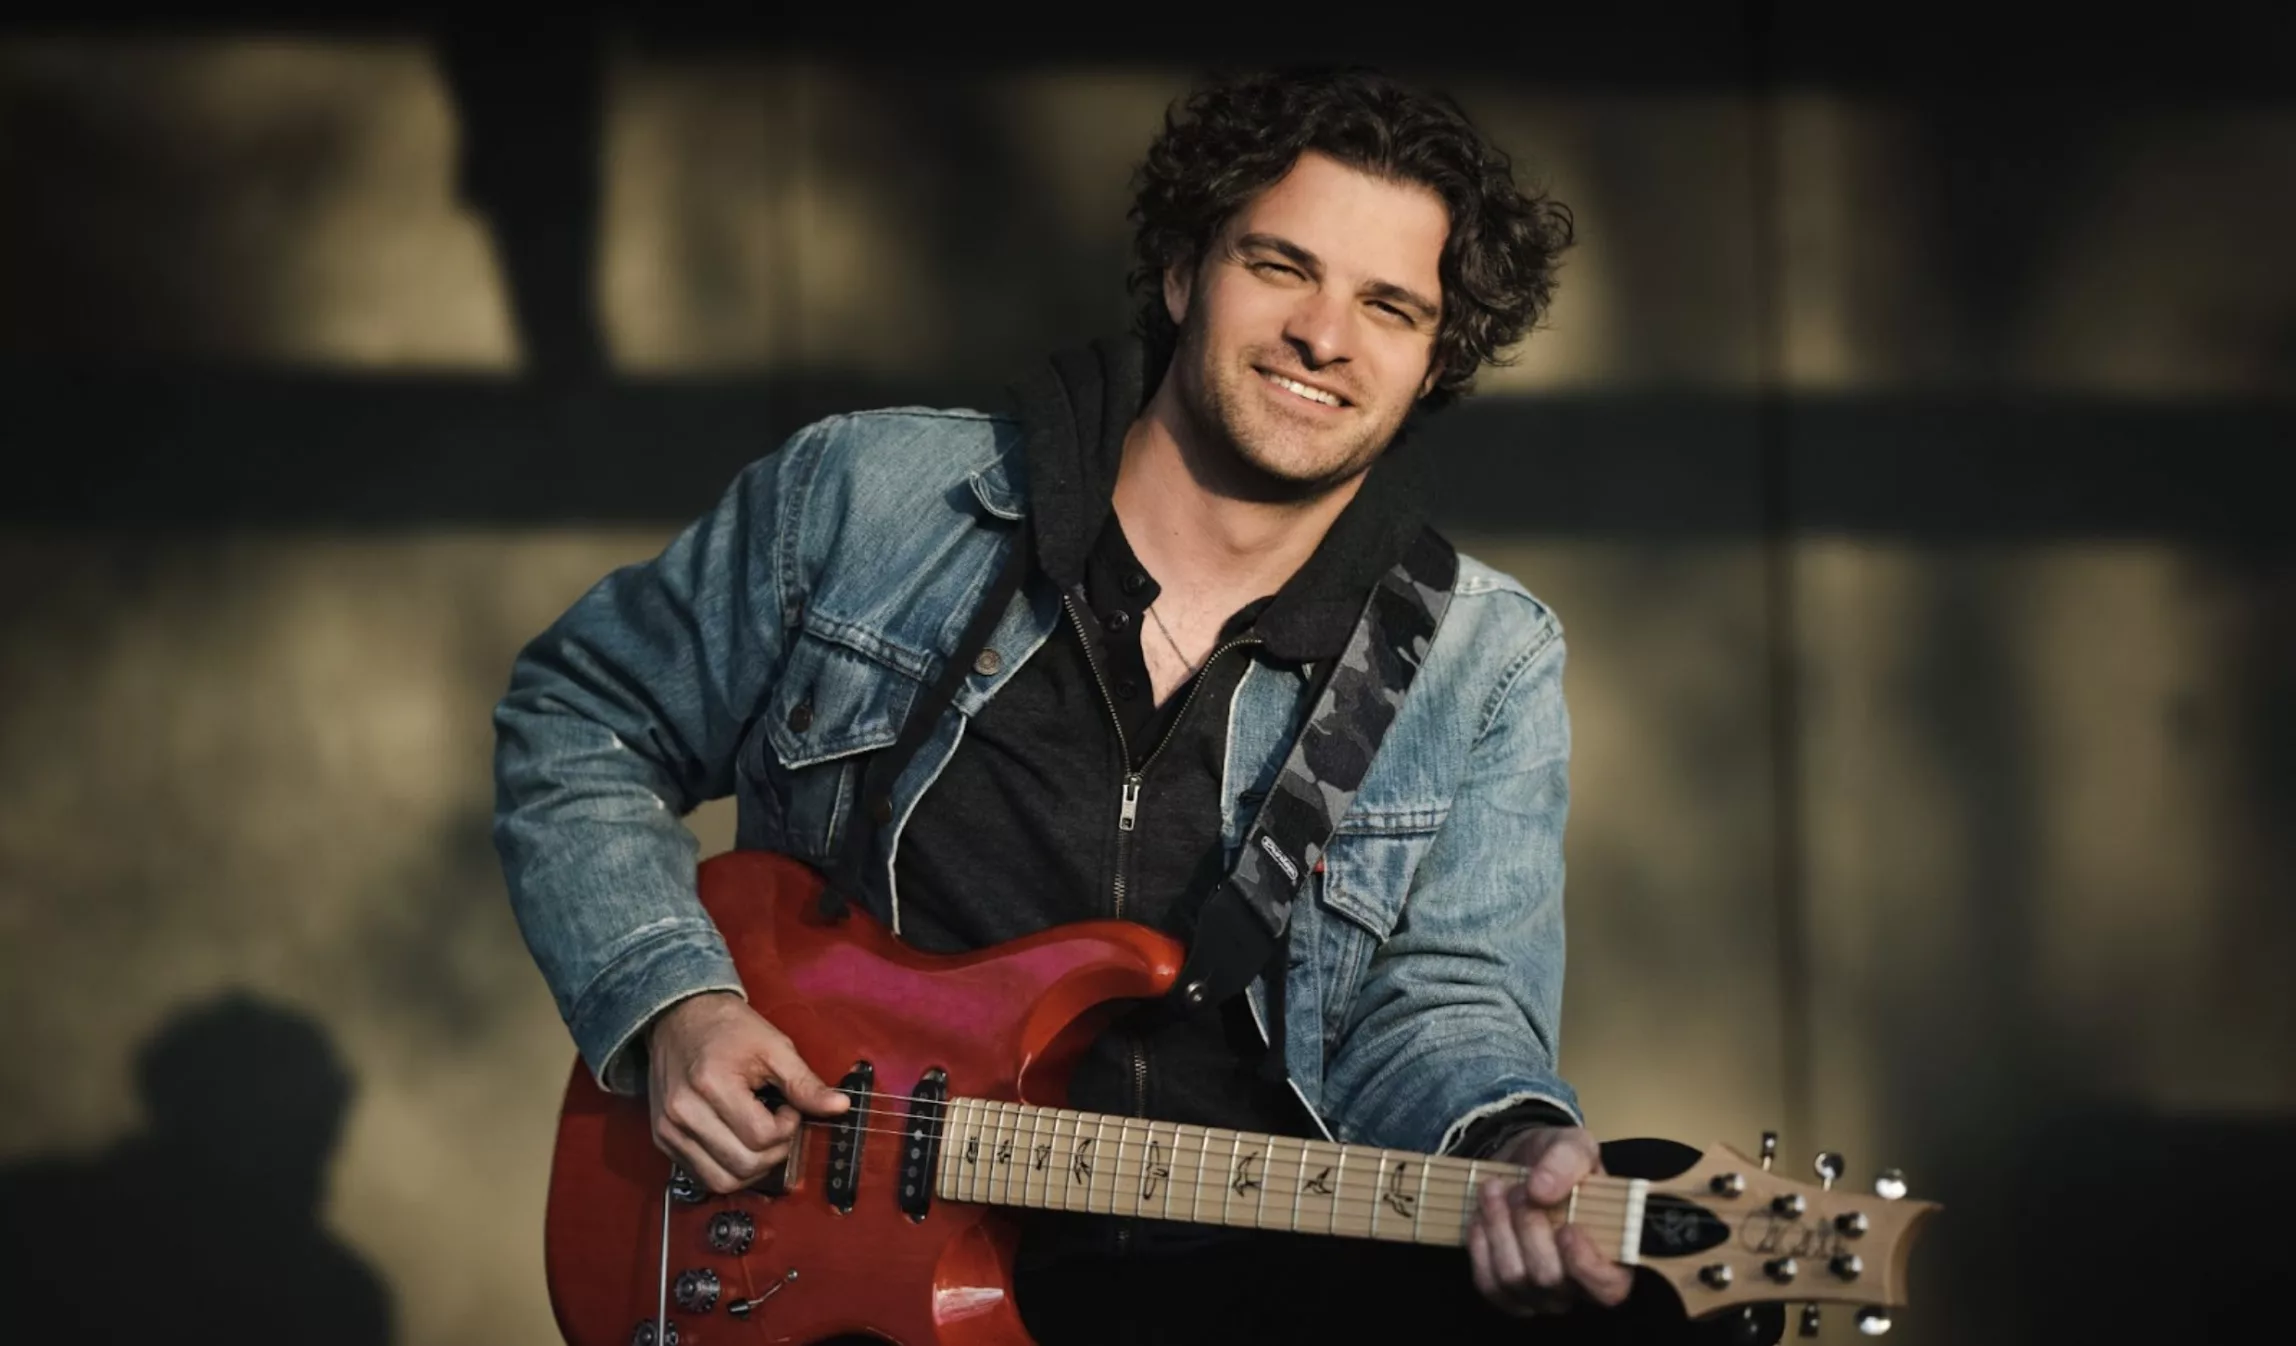 Mark Lettieri ‘01, Four-Time Grammy Award-Winning Guitarist, Composer, and Producer